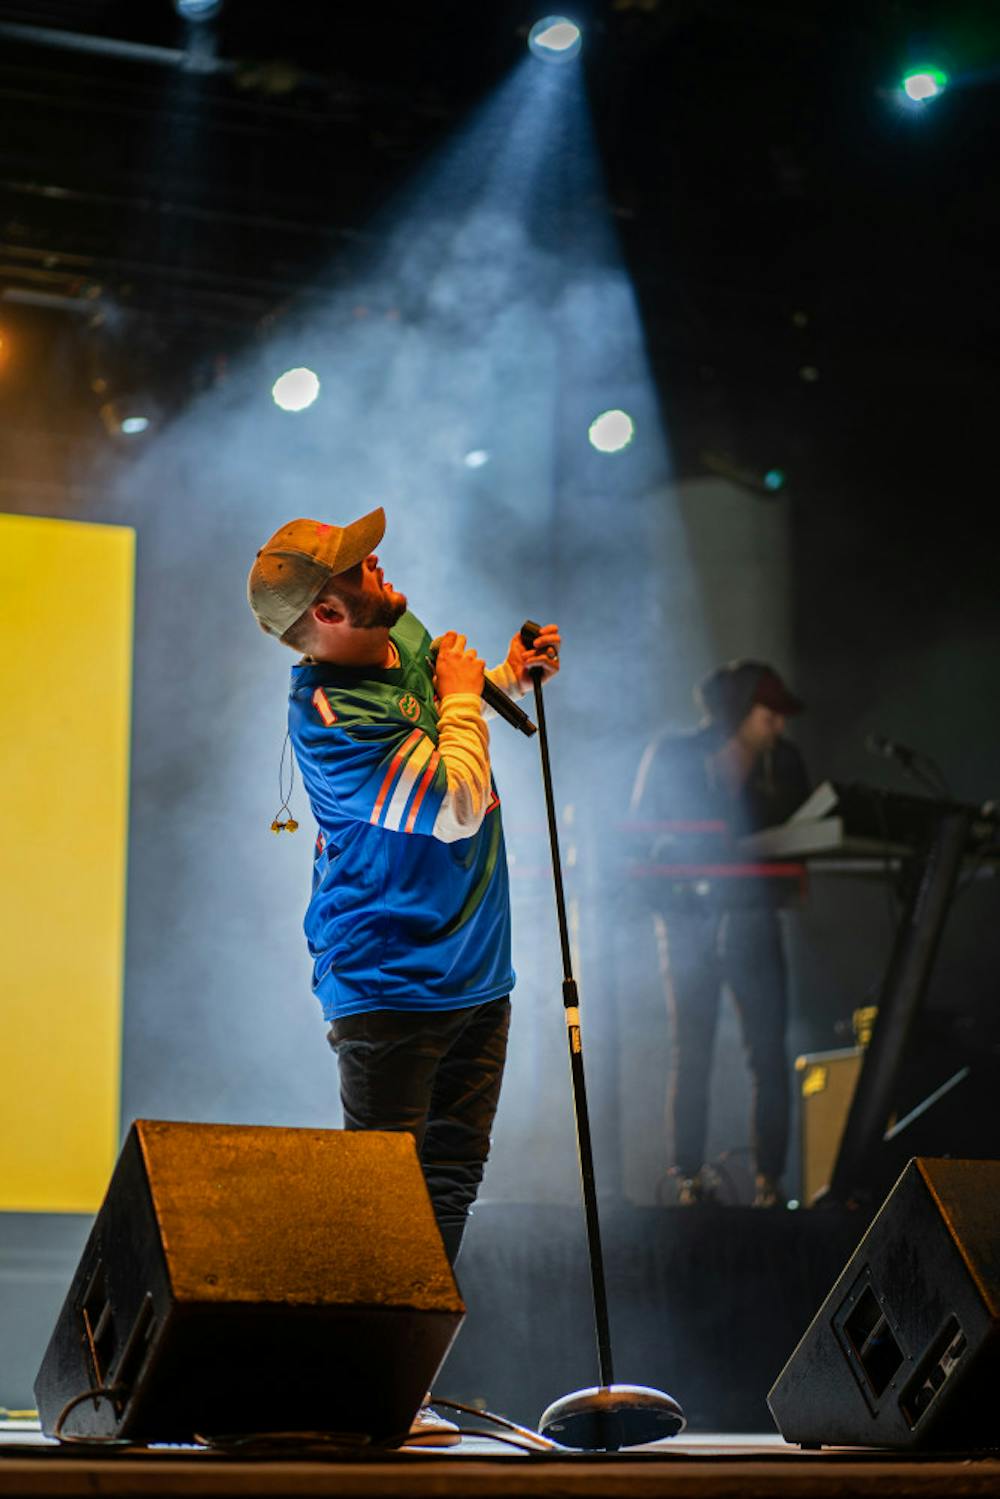 <p dir="ltr"><span>Quinn XCII shows off his UF jersey Friday night during the Fall concert at Flavet Field.</span></p>